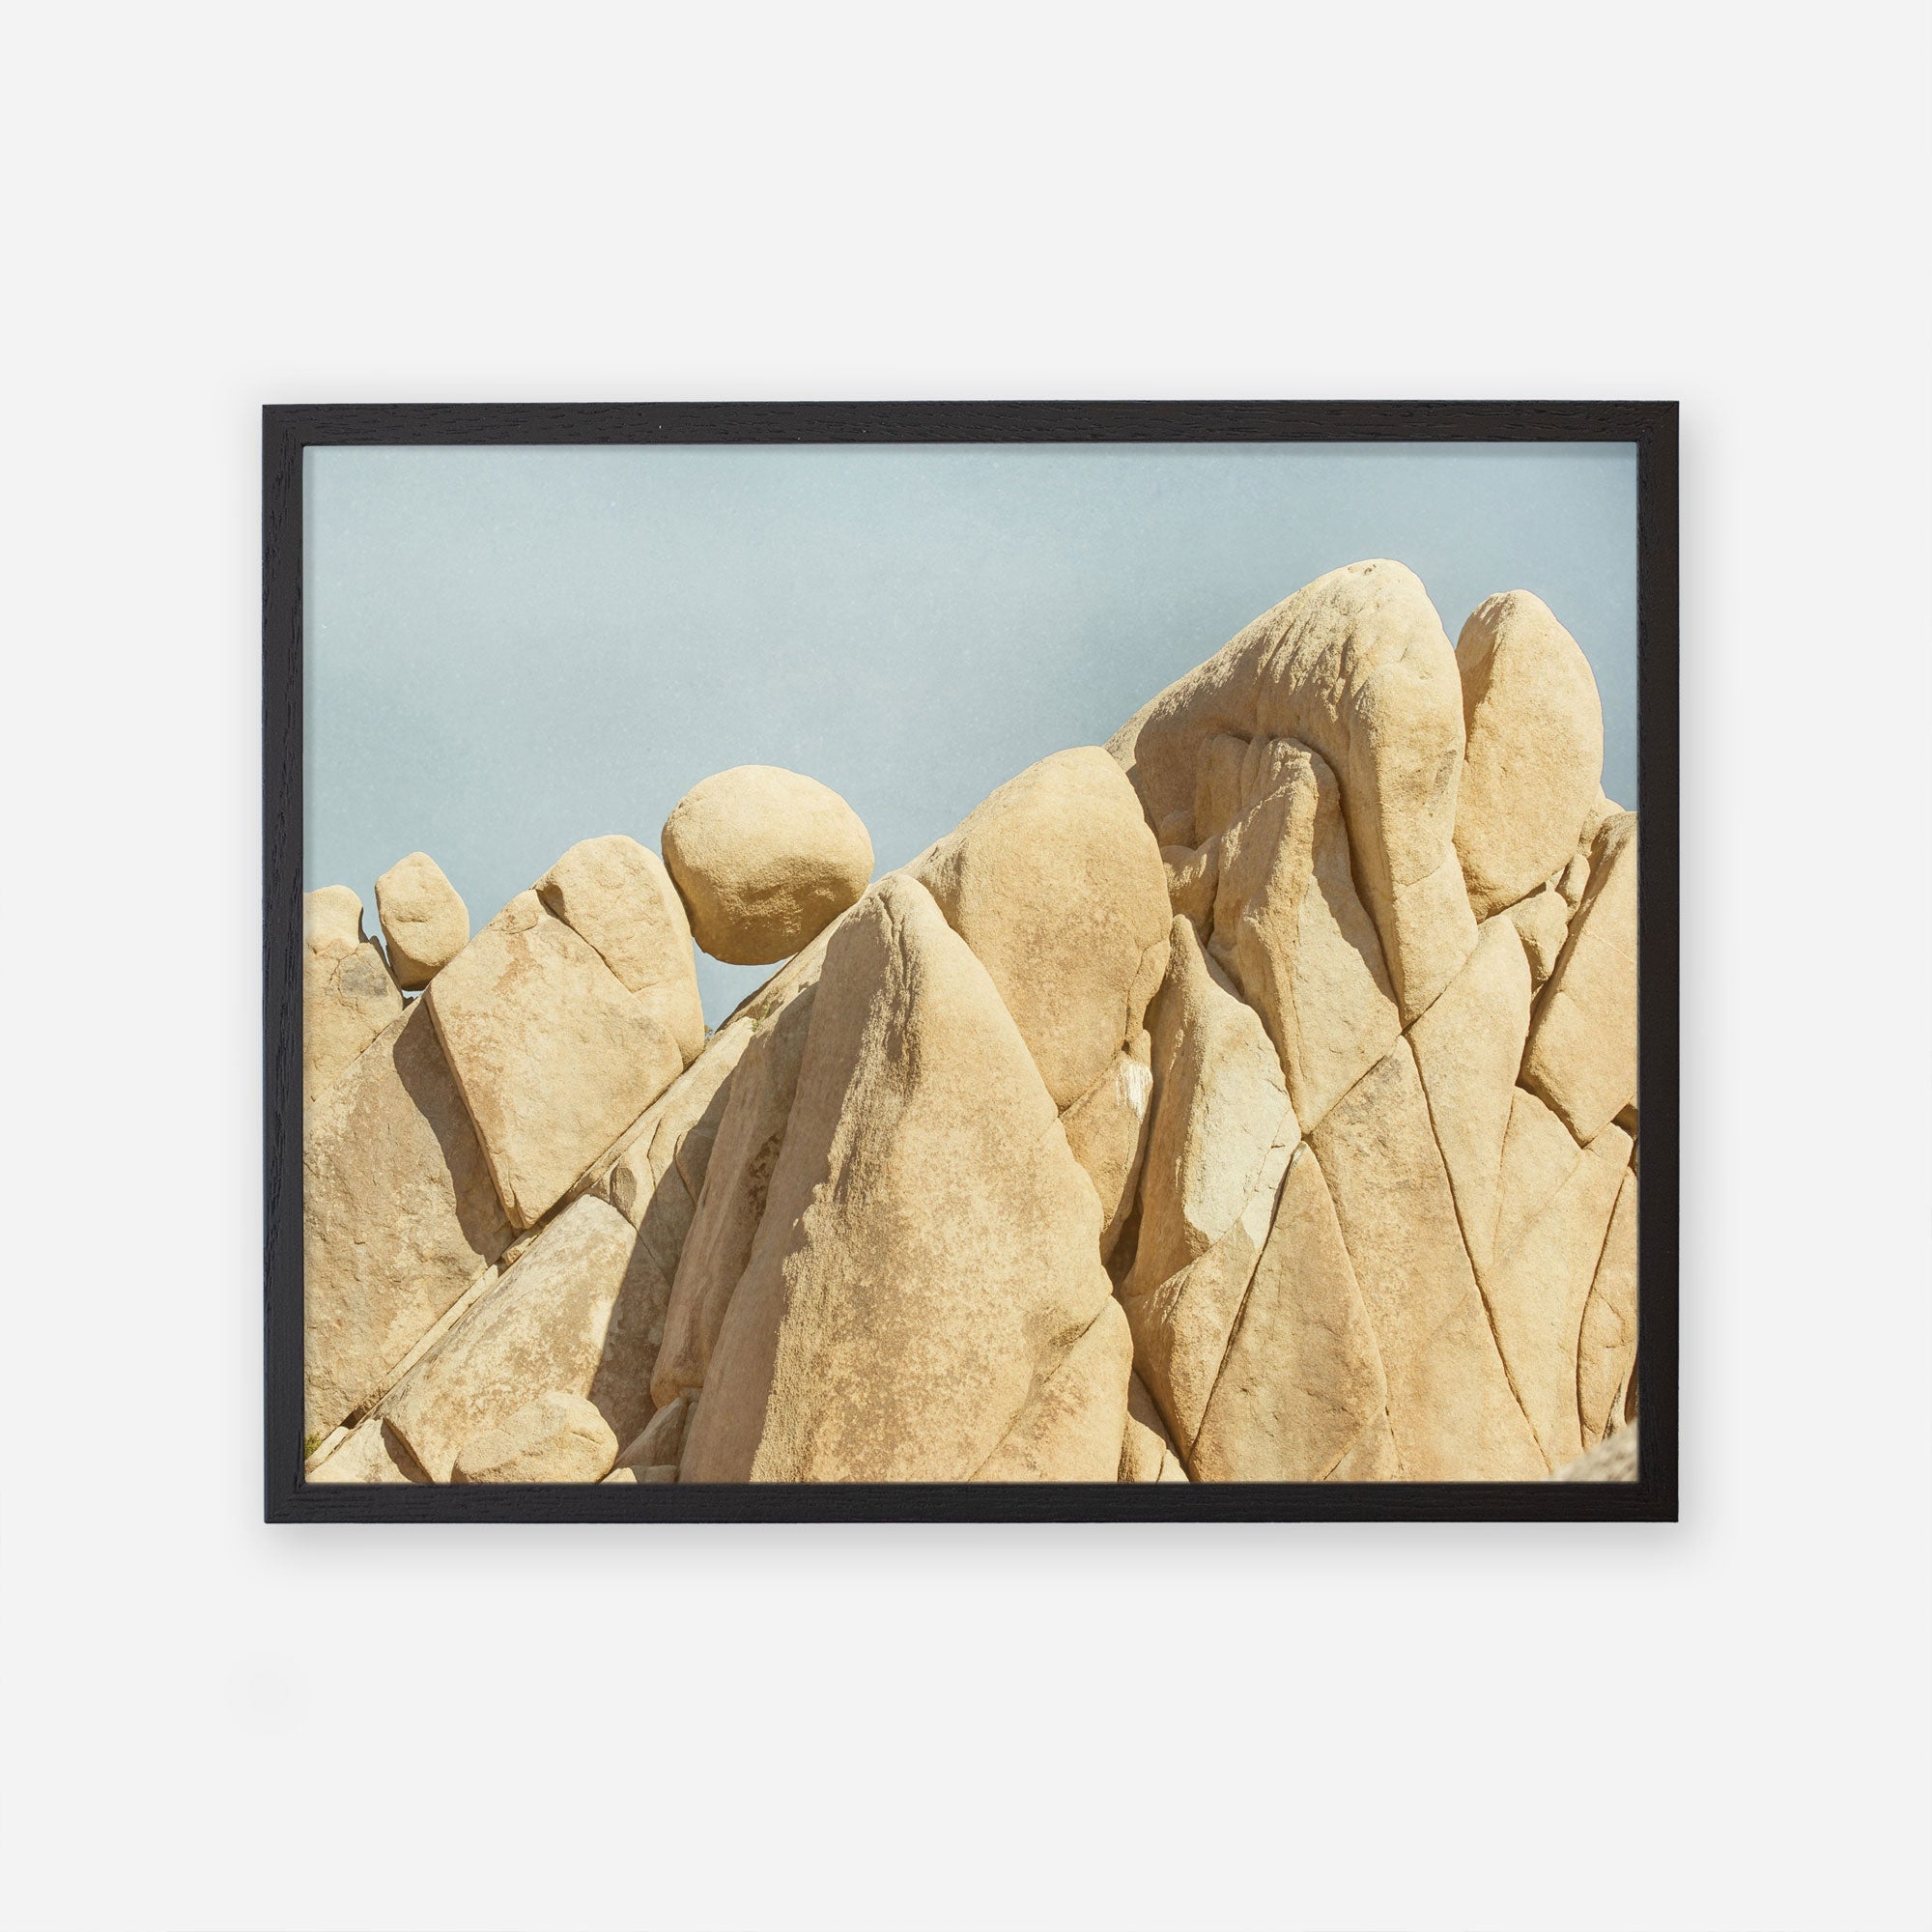 A framed photograph of rugged desert rock formations in Joshua Tree National Park under a clear blue sky, showcasing warm beige tones and smooth, windswept textures by Offley Green.